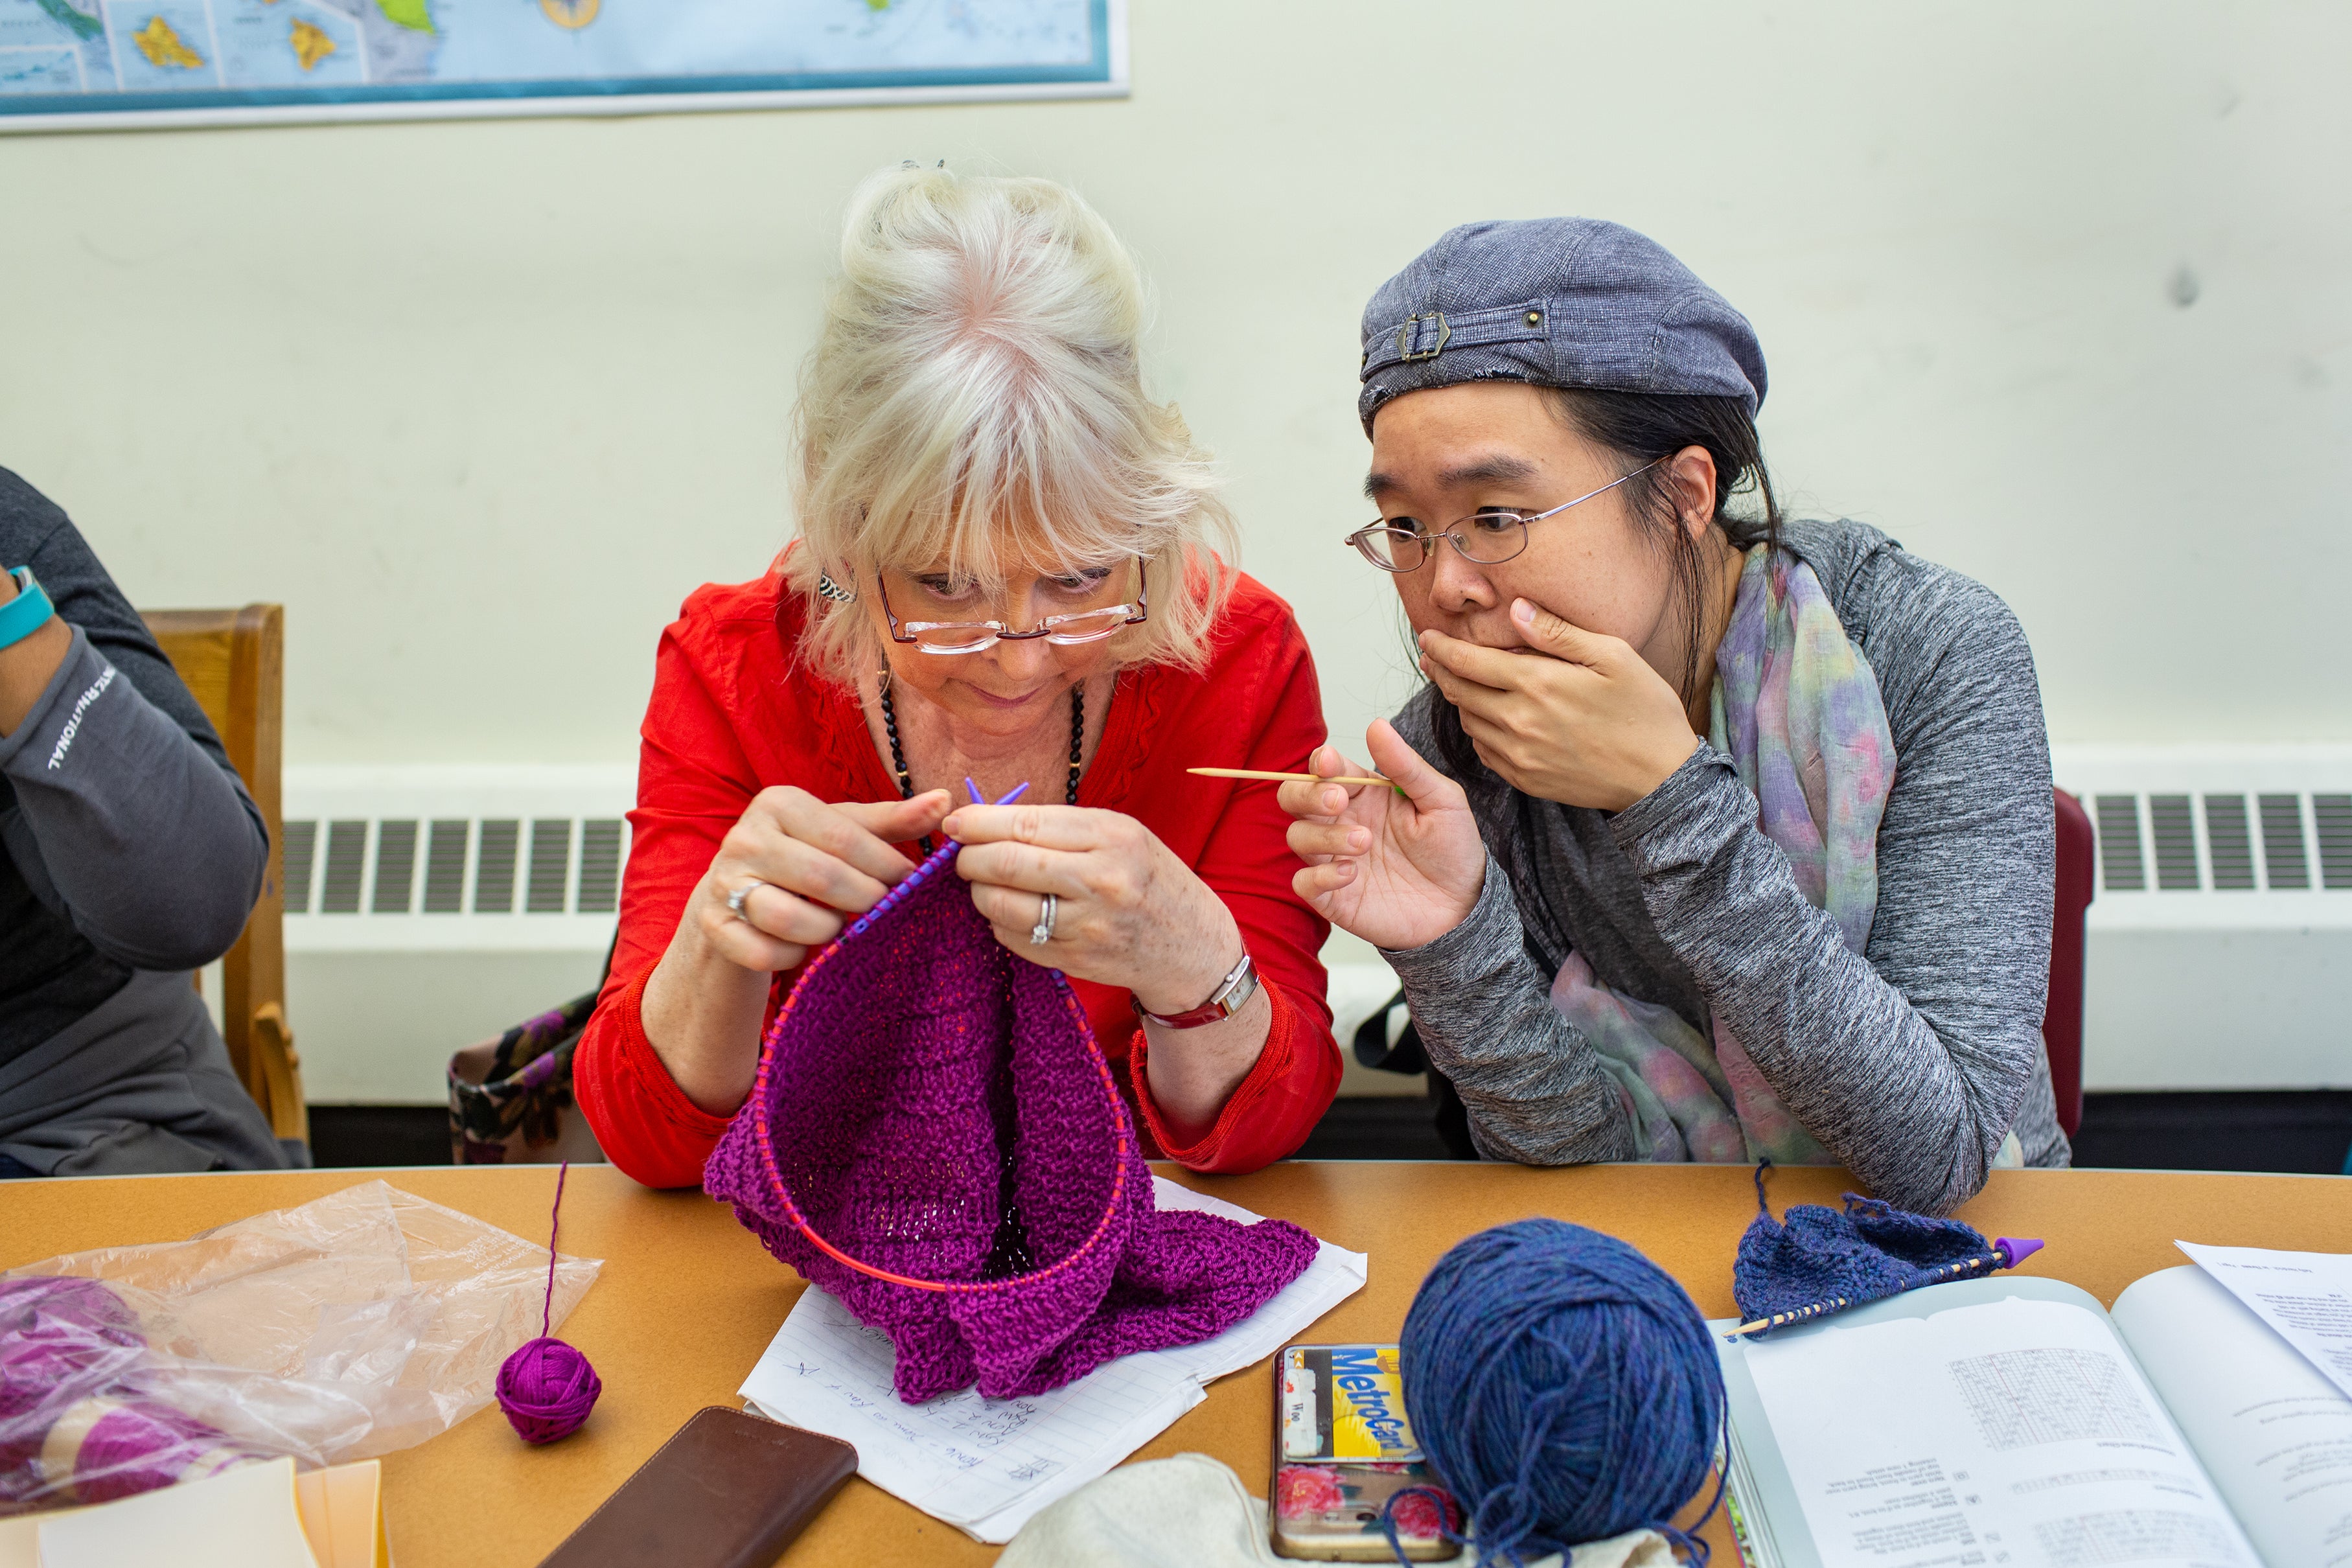 A woman helps another woman with her knitting.